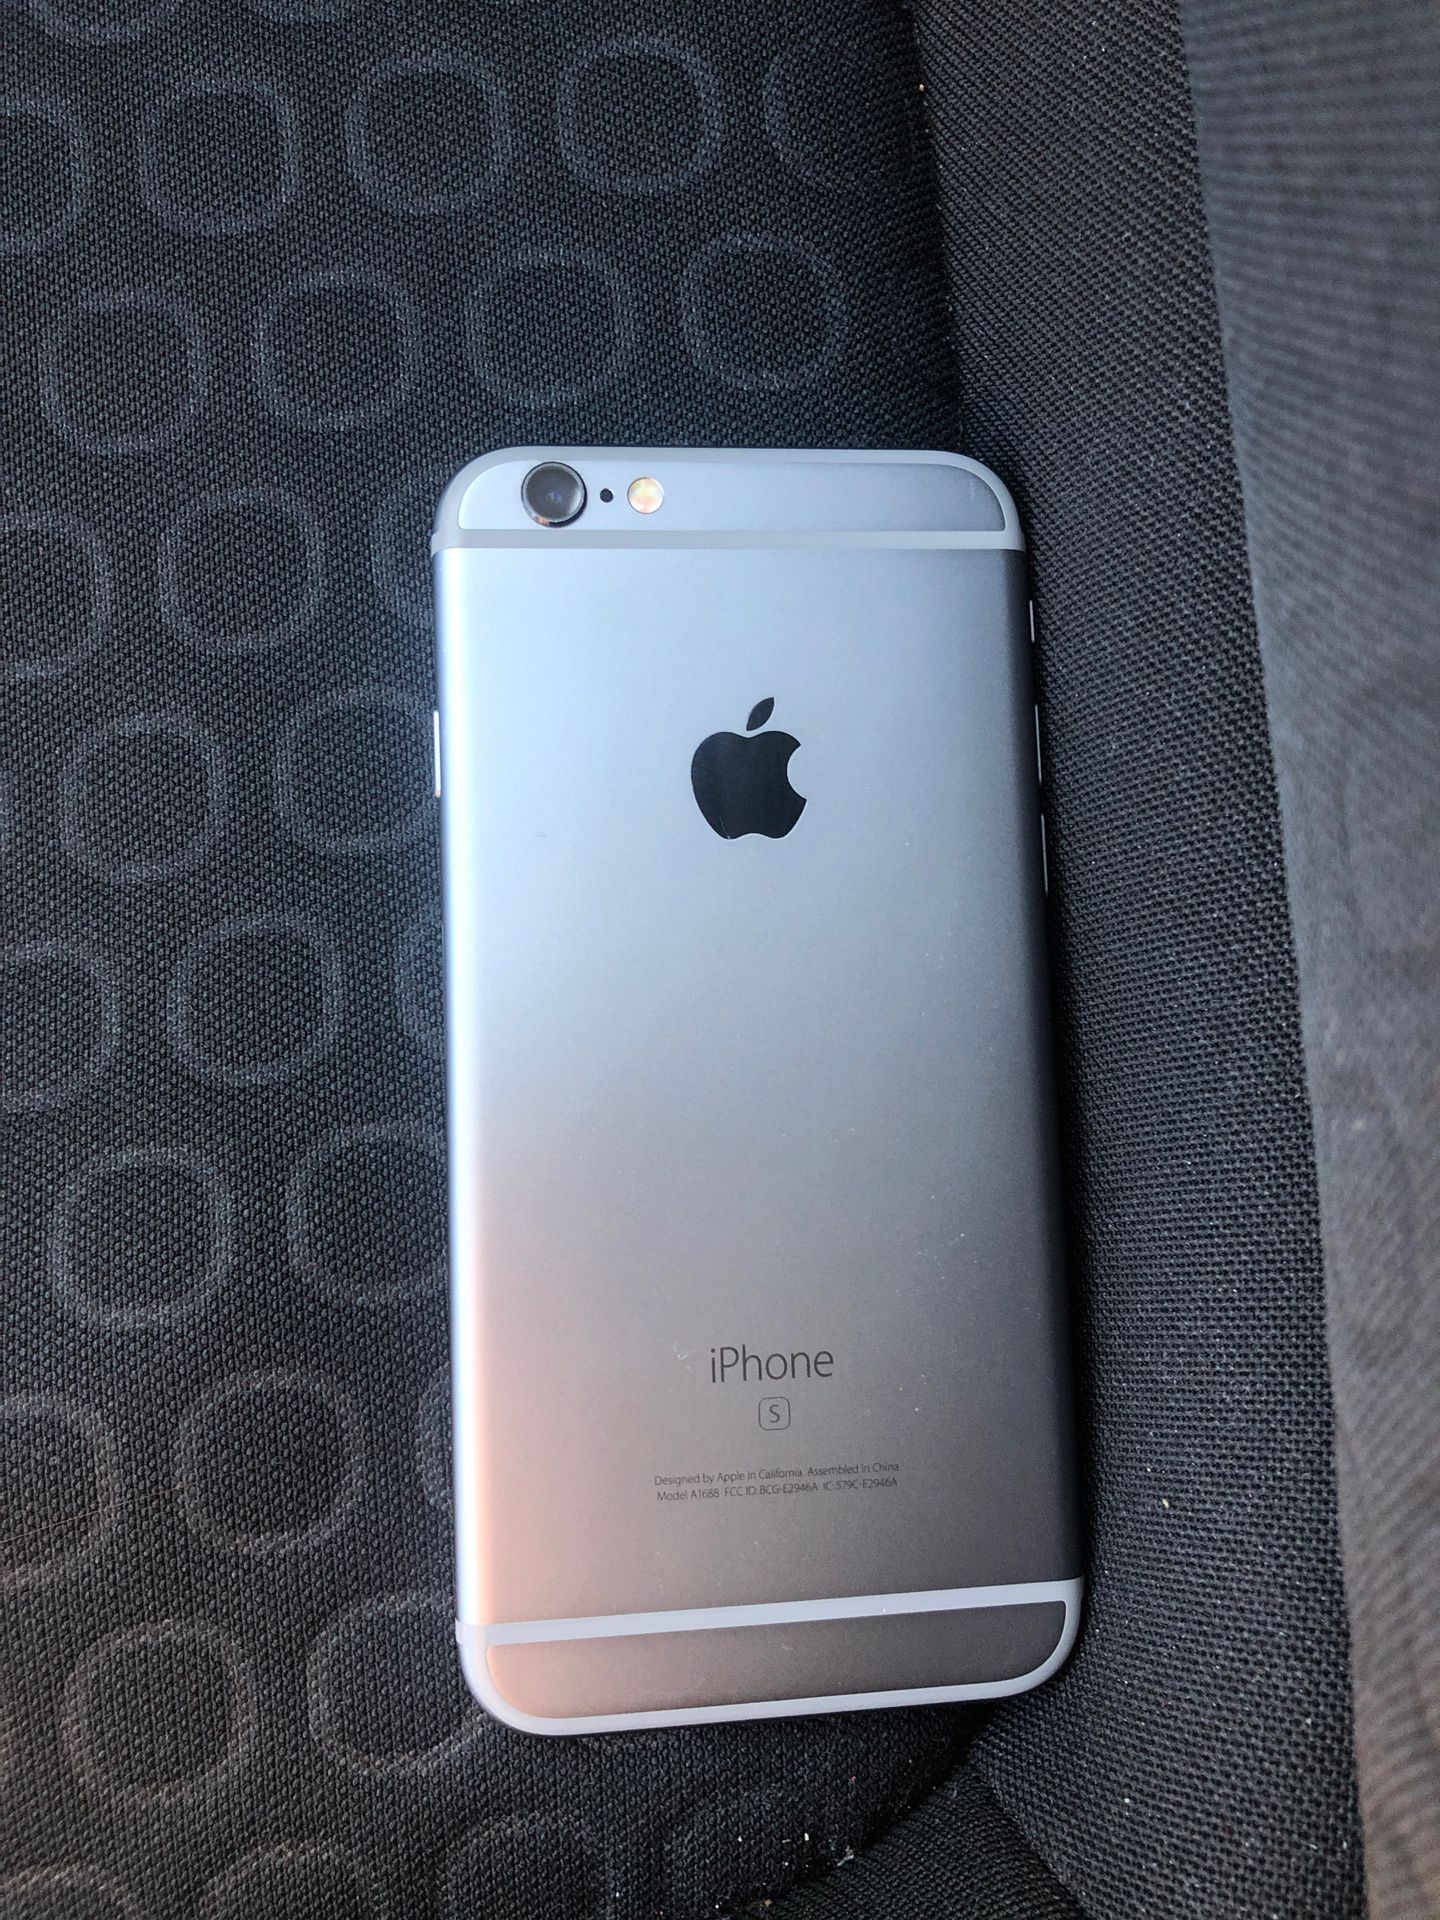 iPhone 6s | Unlocked for any carrier